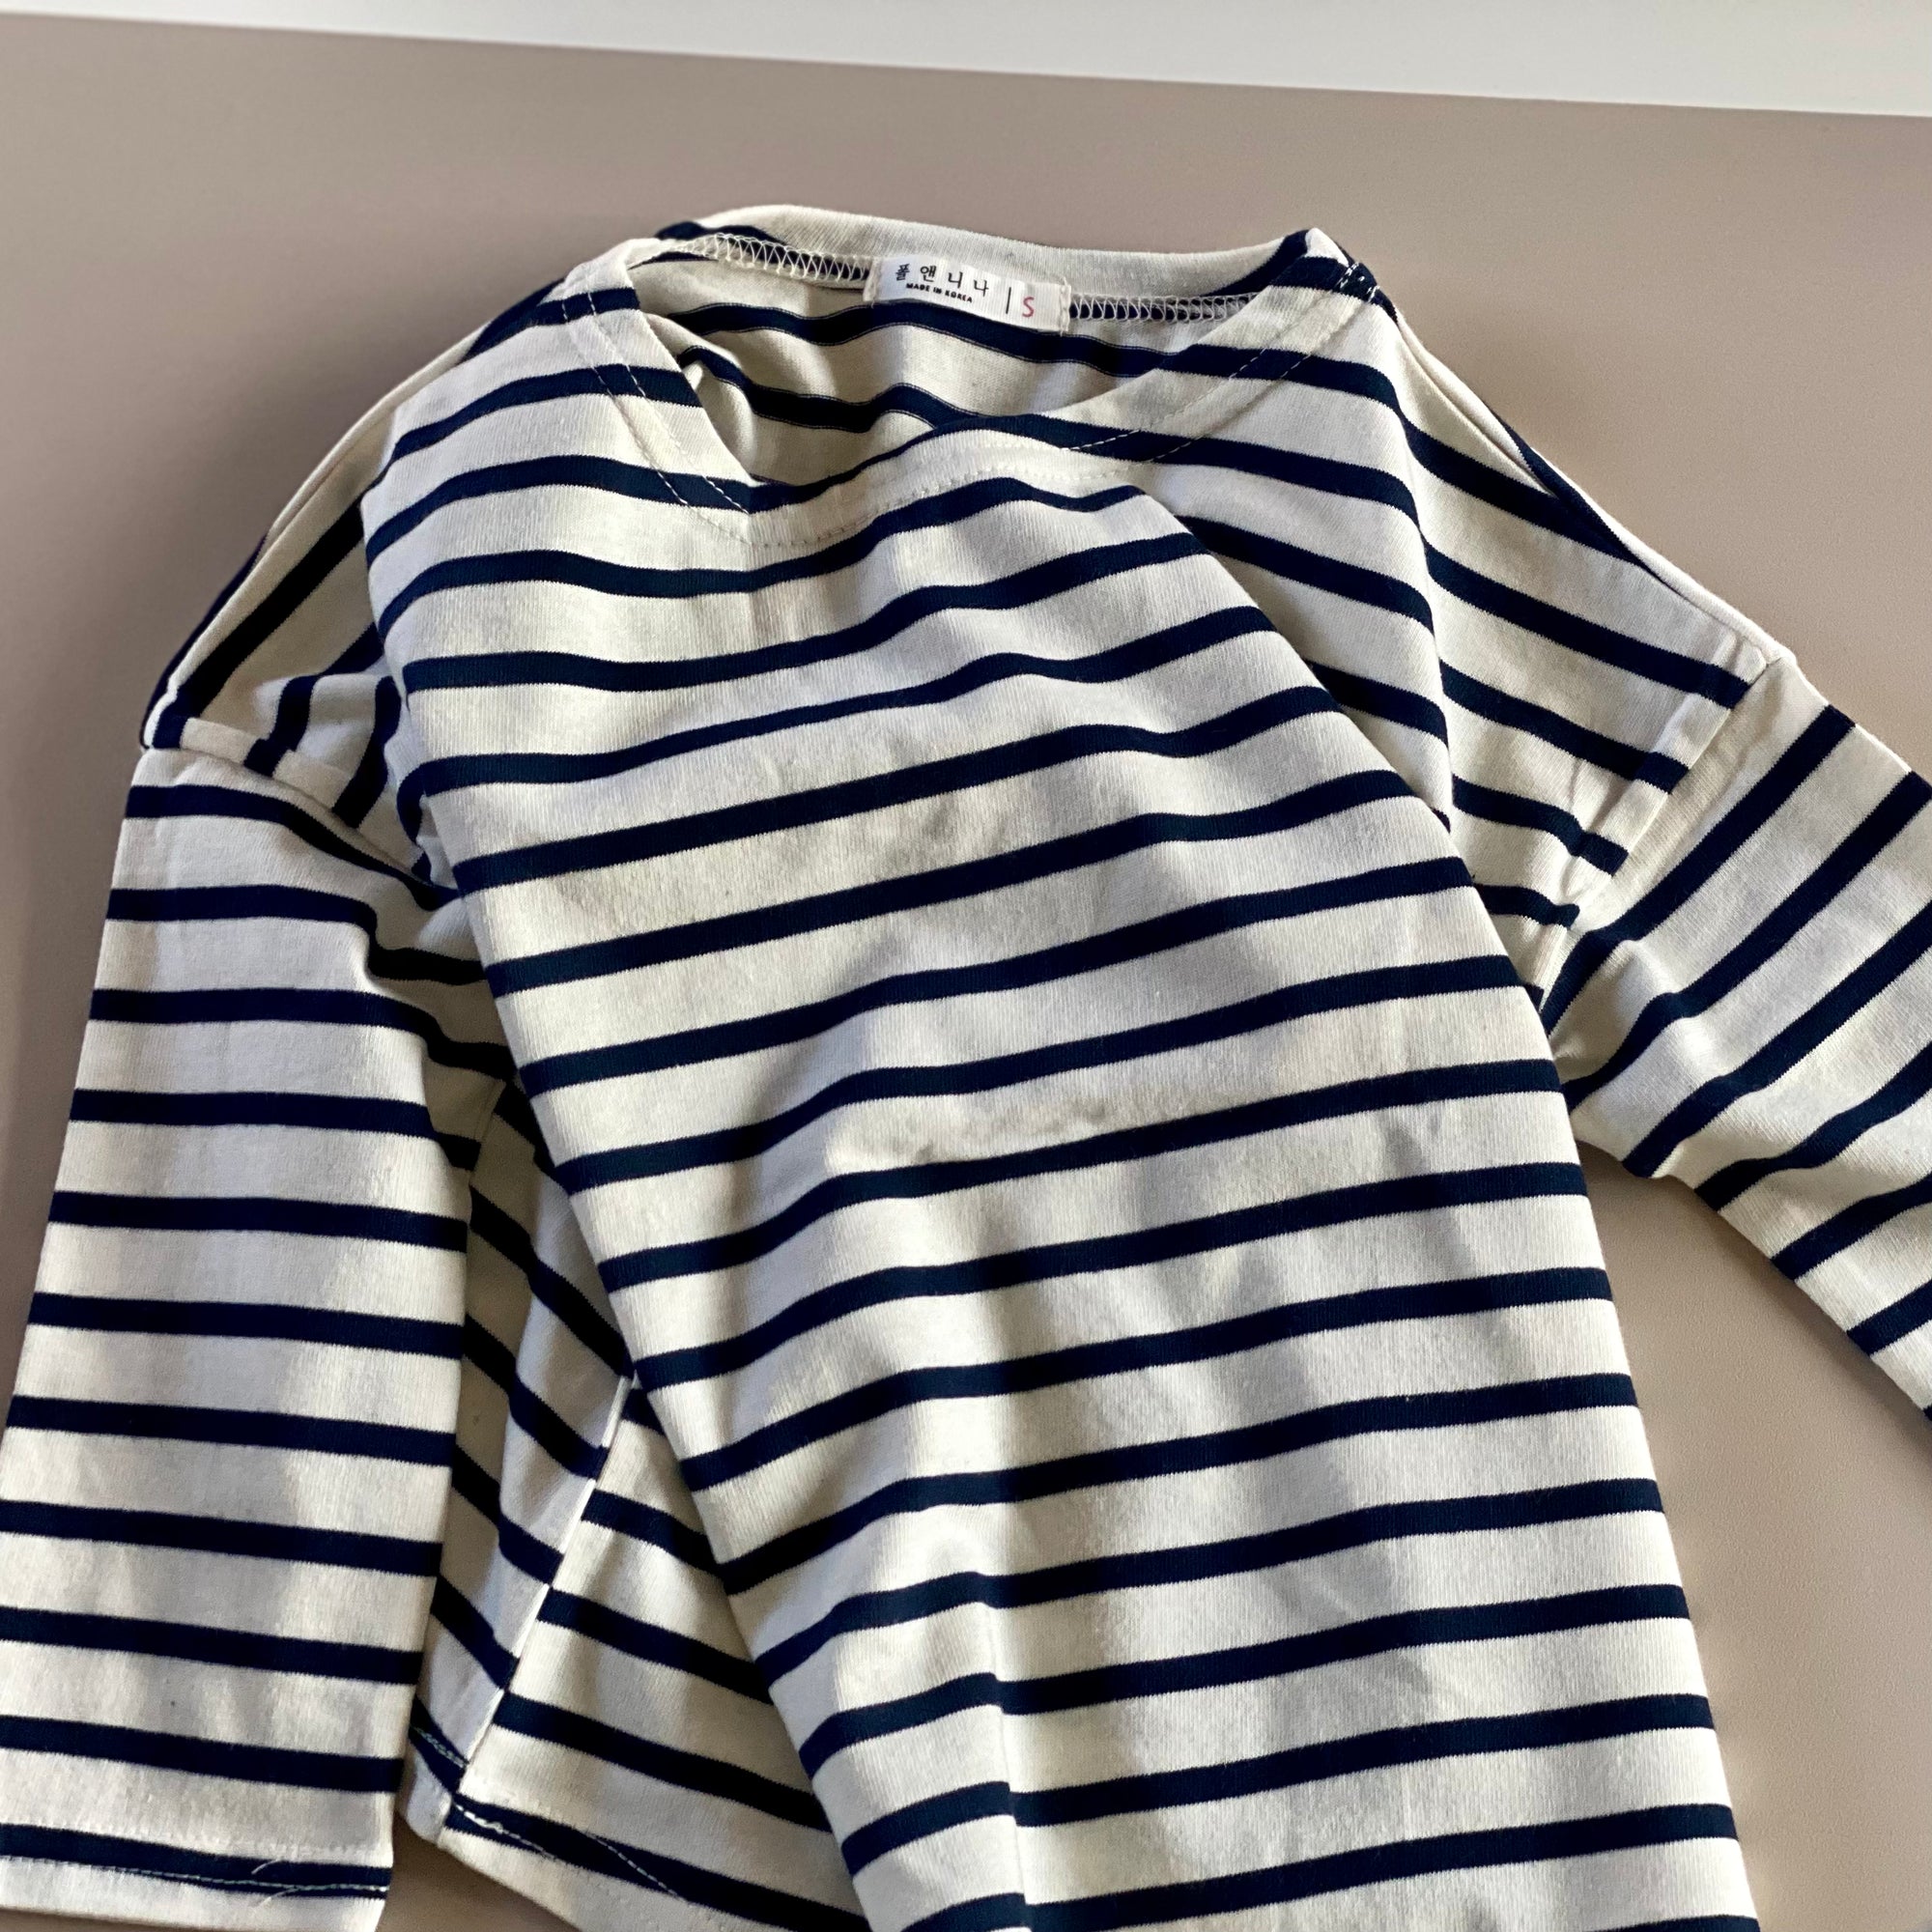 Breton Stripe Tee - Navy find Stylish Fashion for Little People- at Little Foxx Concept Store